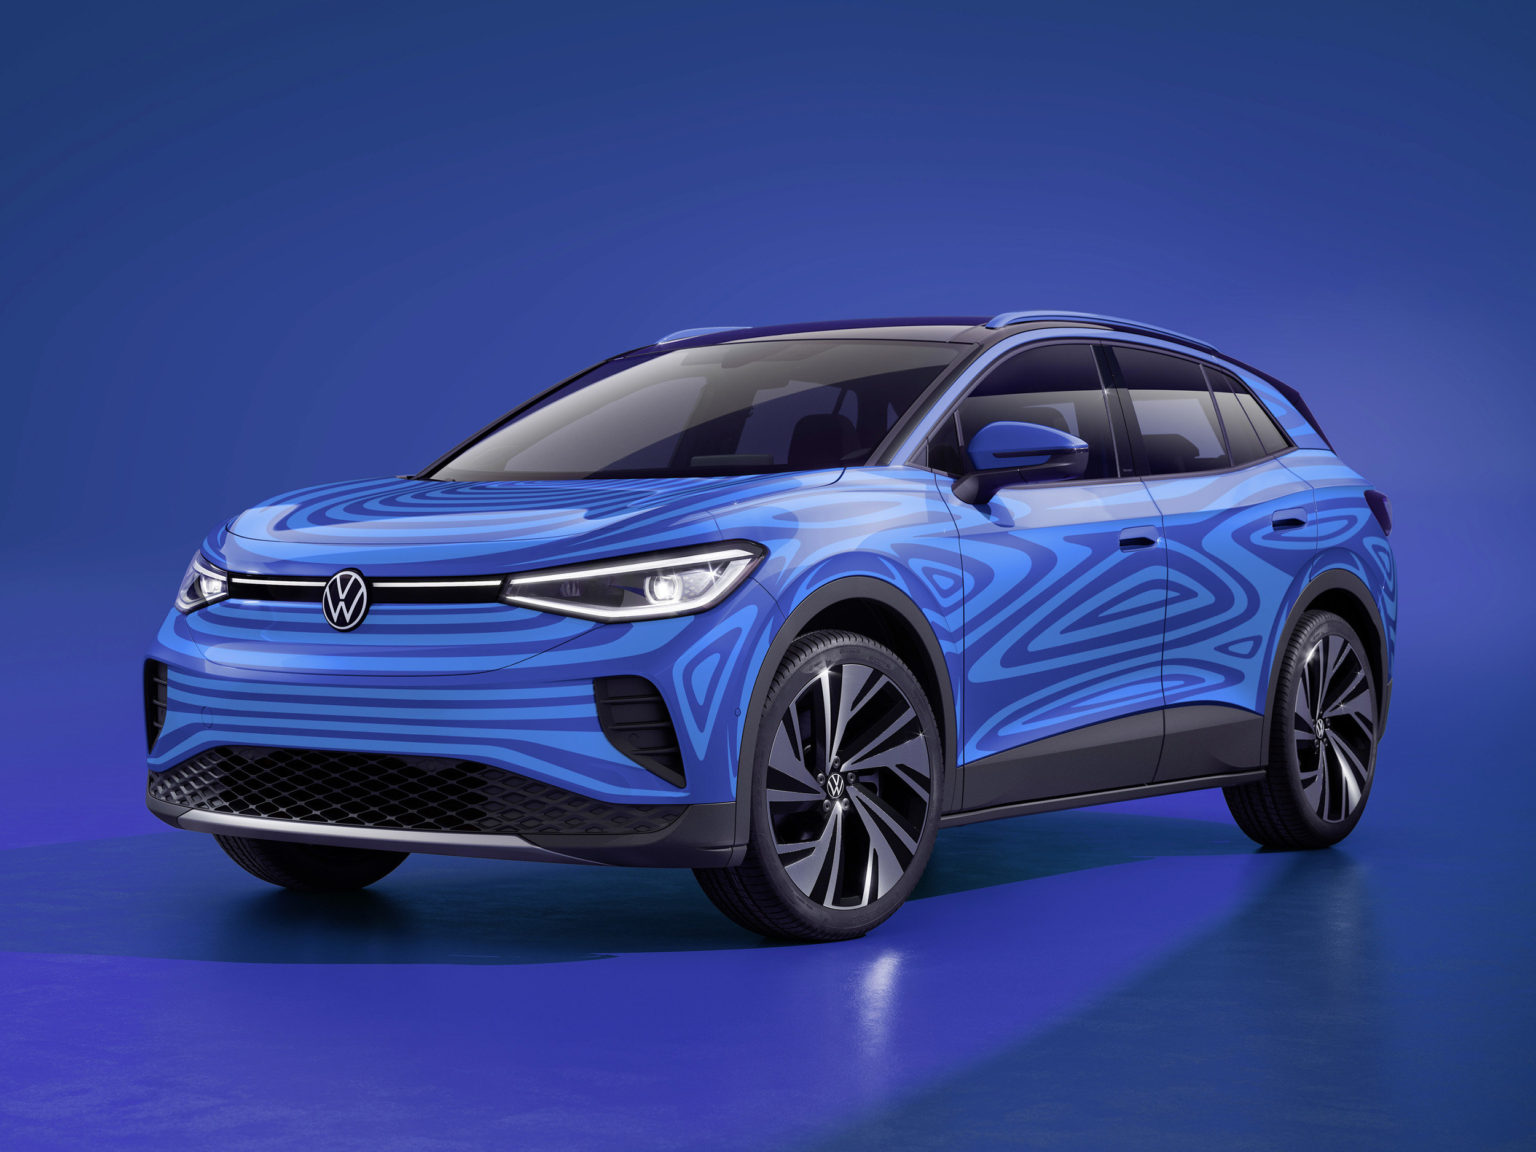 Volkswagen is turning concept into reality with the debut of the ID.4.